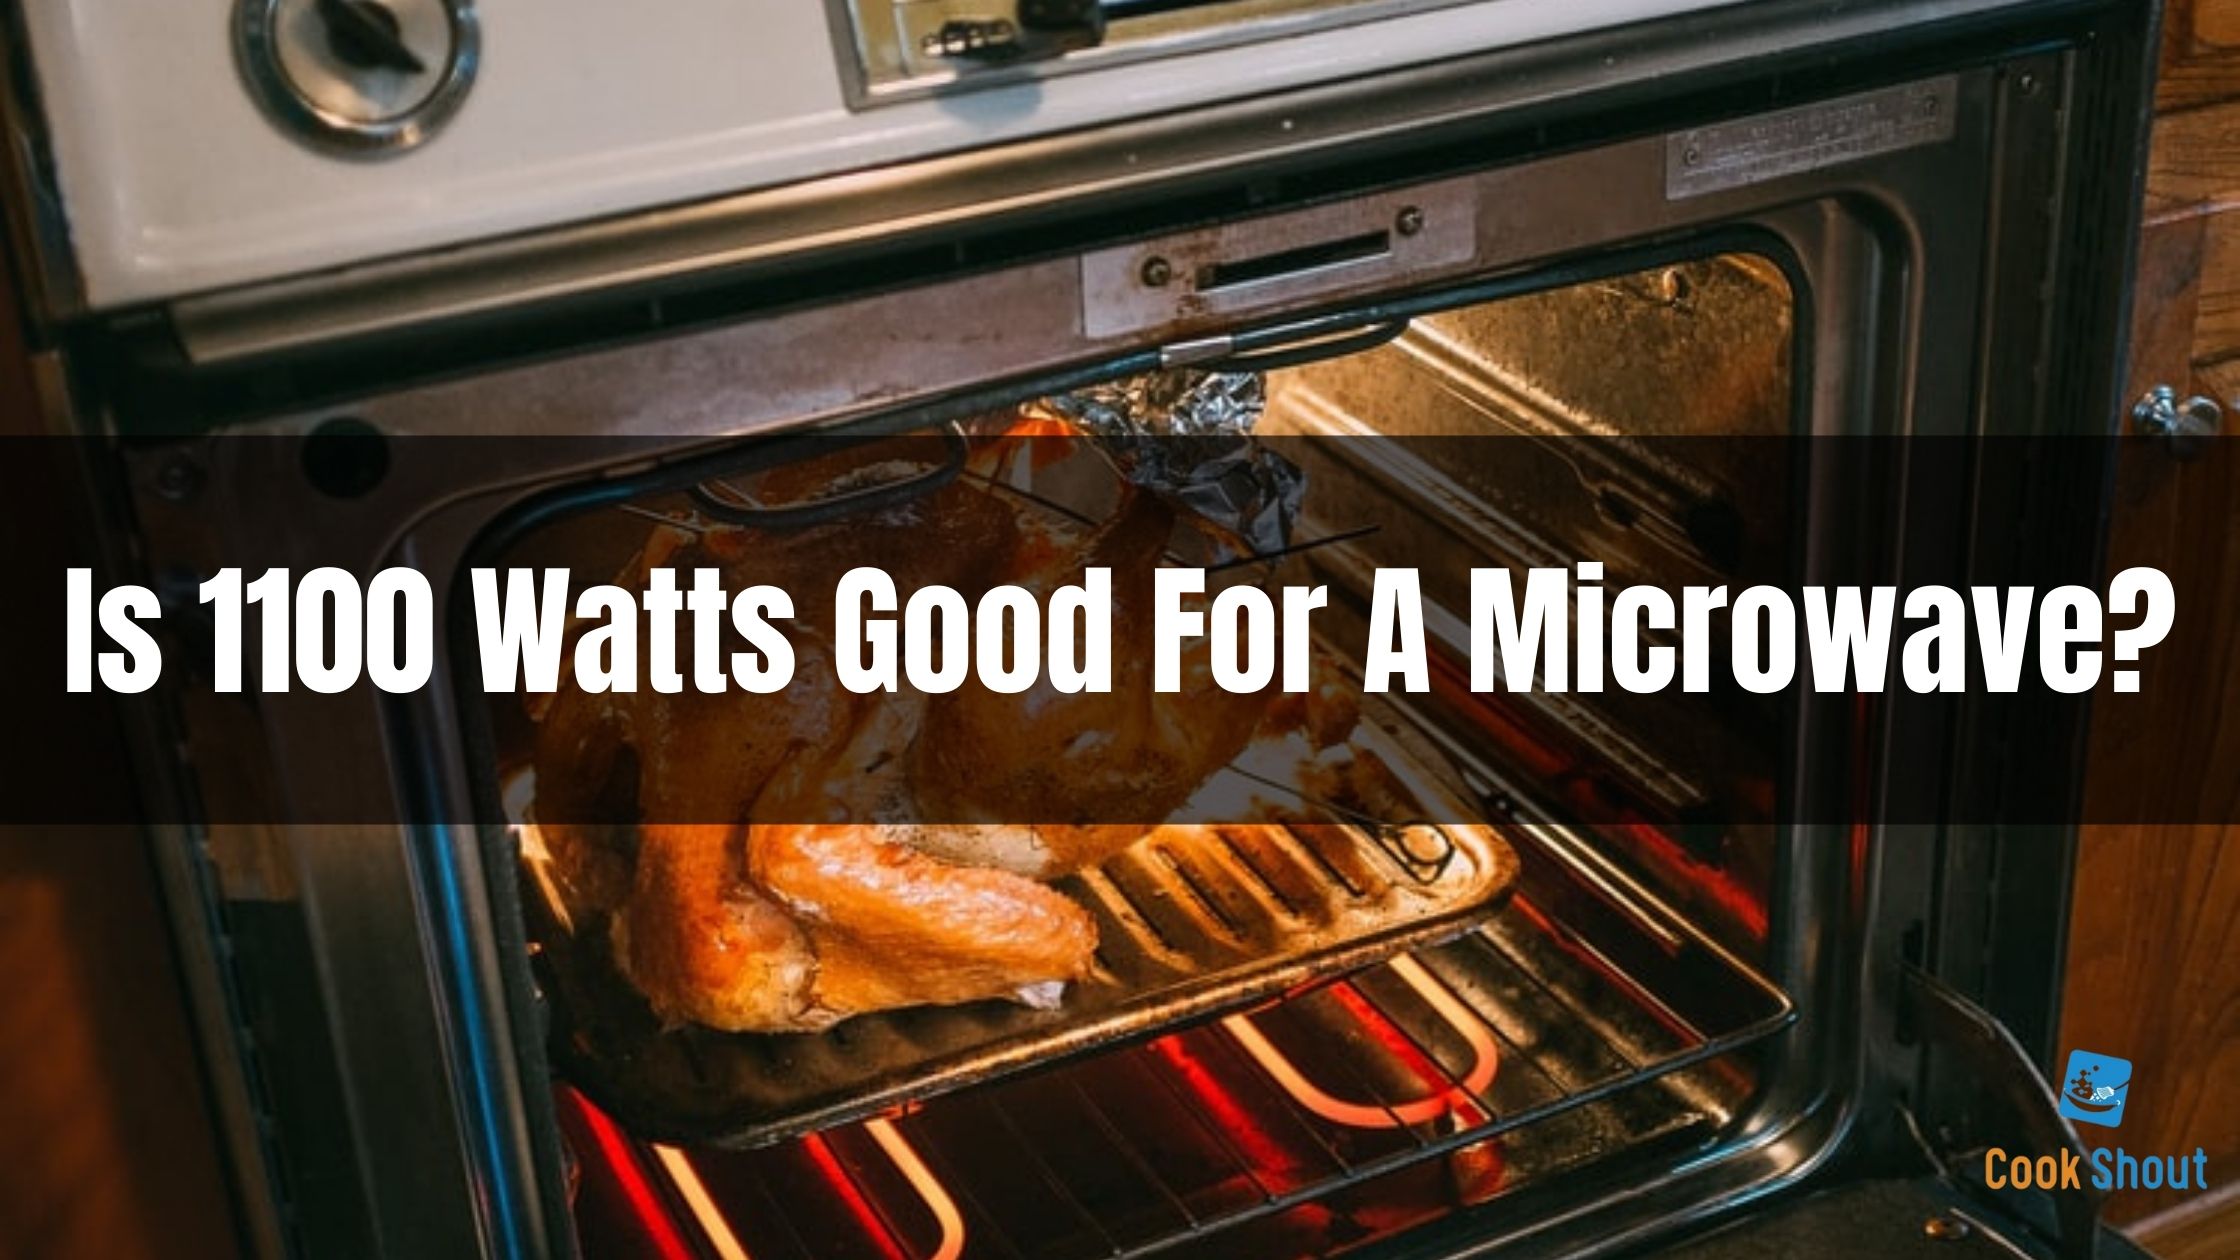 Is 1100 Watts Good For A Microwave?